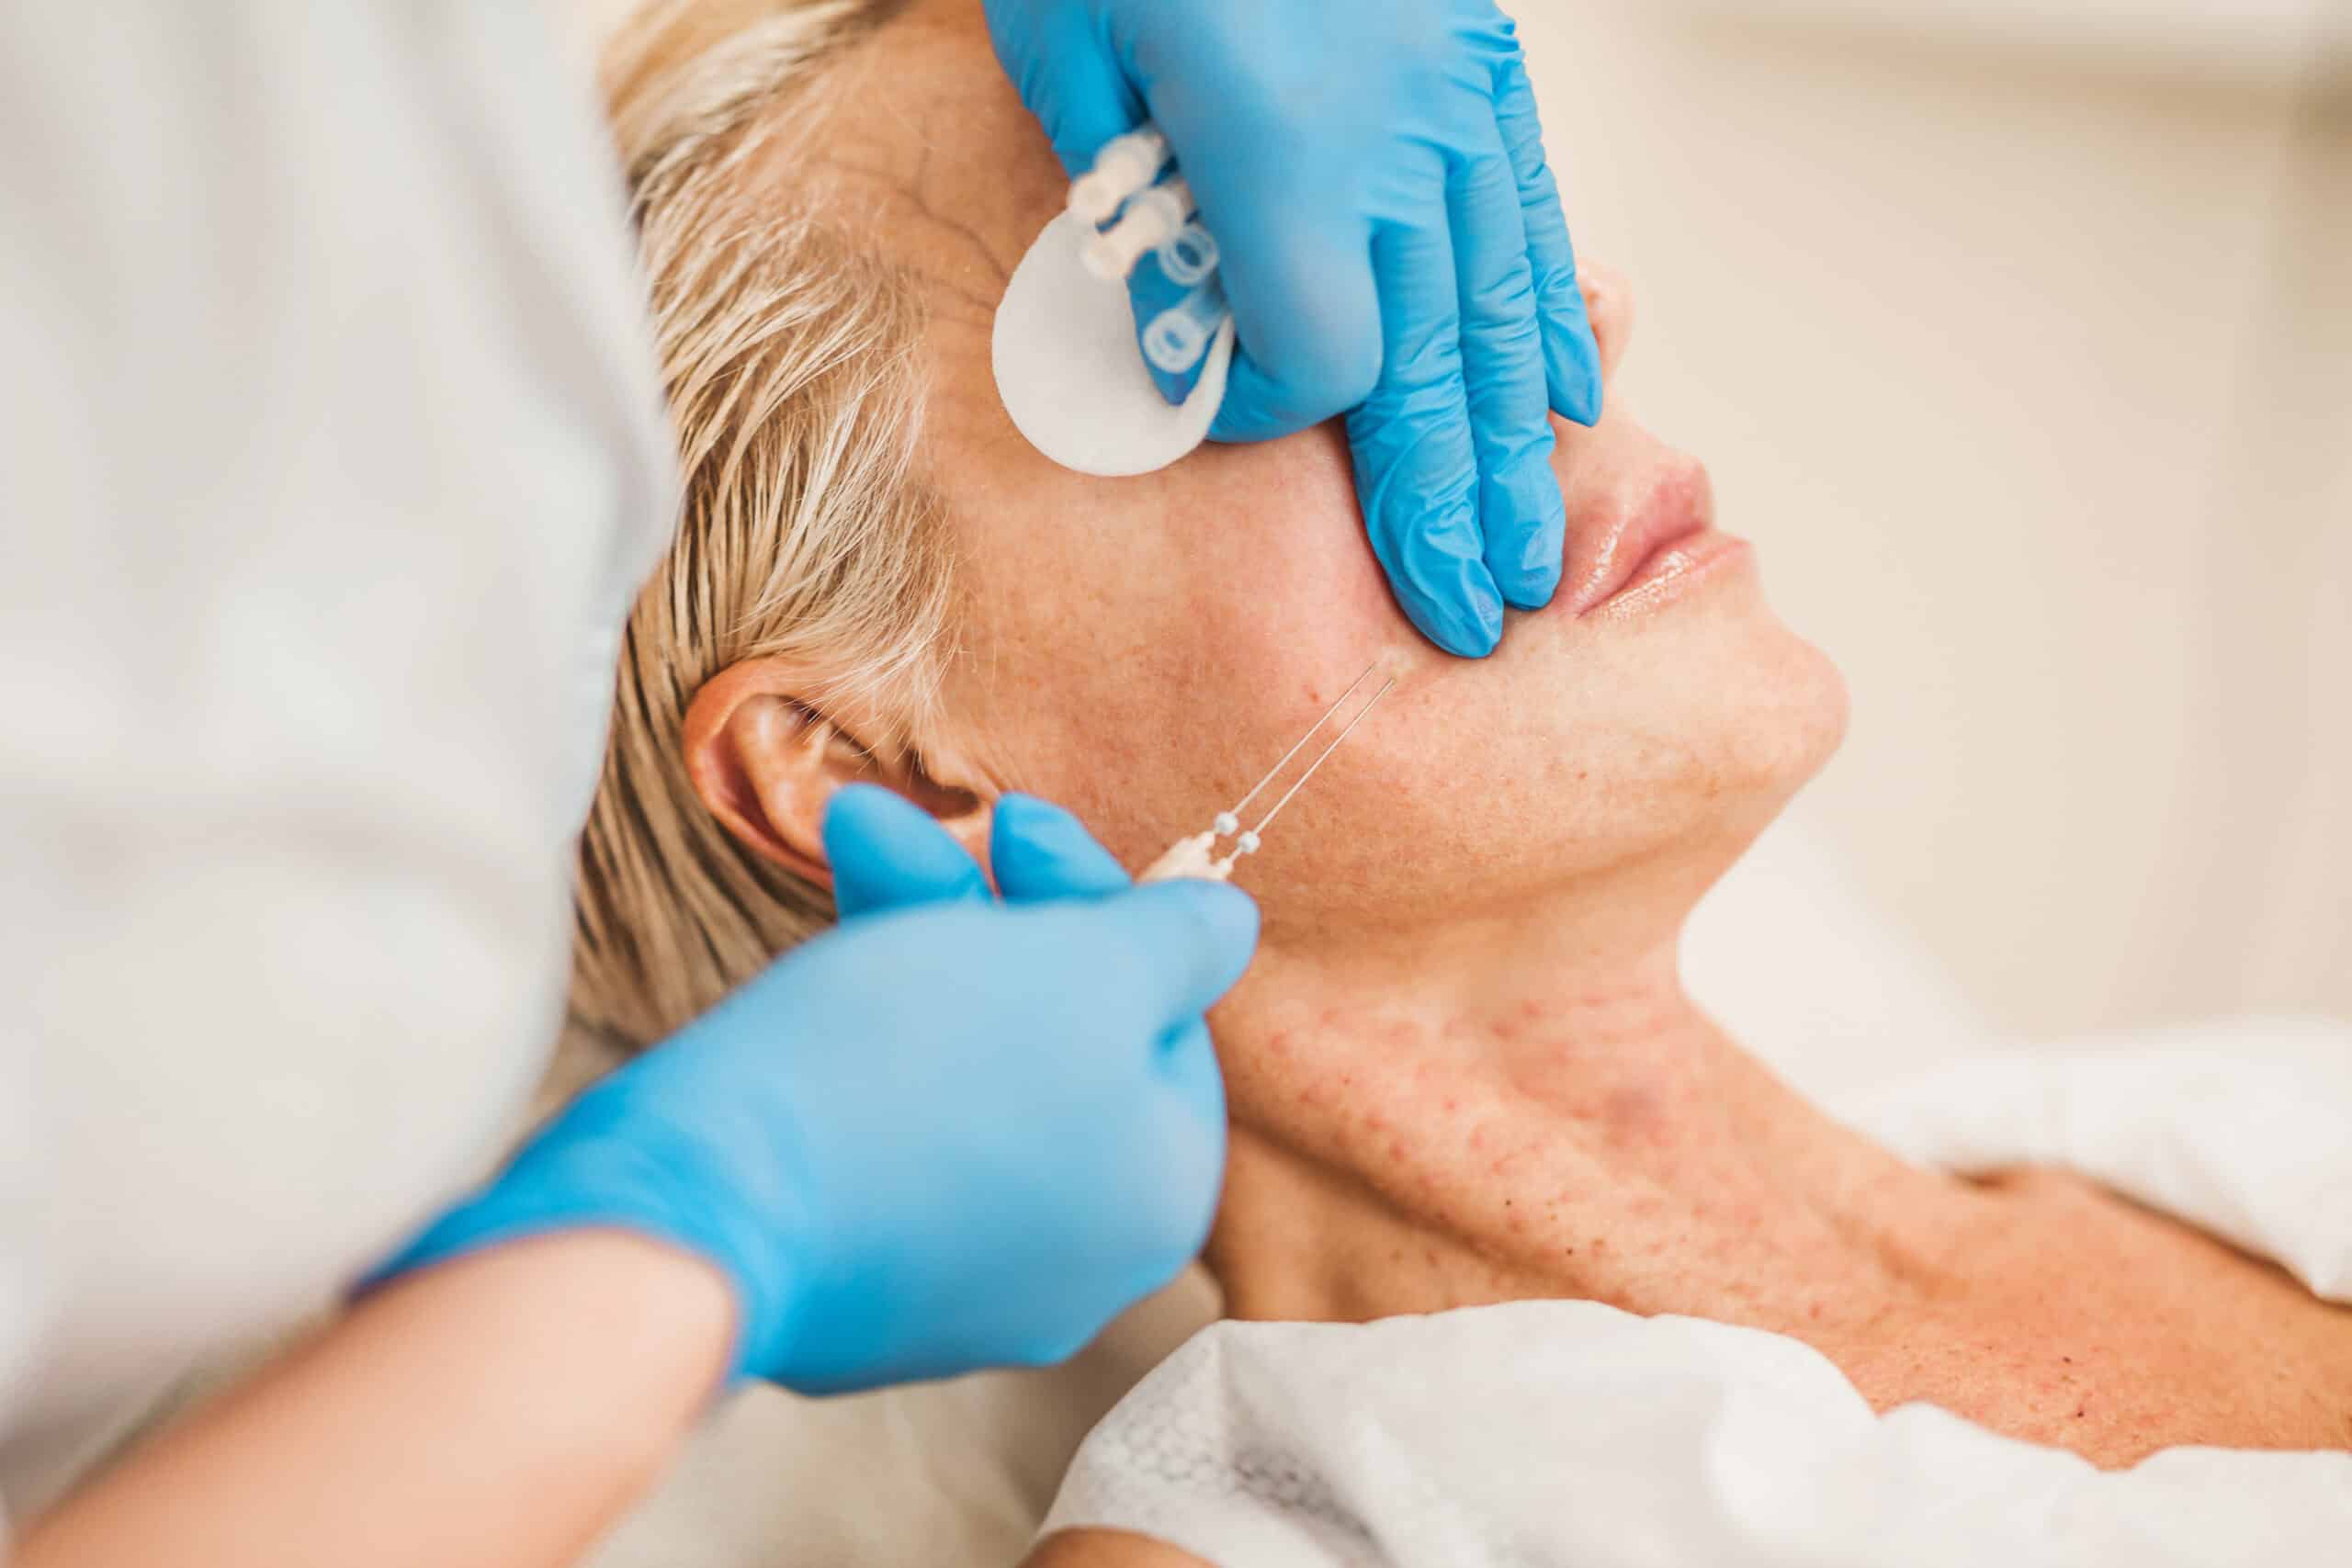 Thread Lift in Glendale, Encino, and Irvine, CA | New Look Skin Center Medical Spa in Glendale, Encino and Irvine, CA